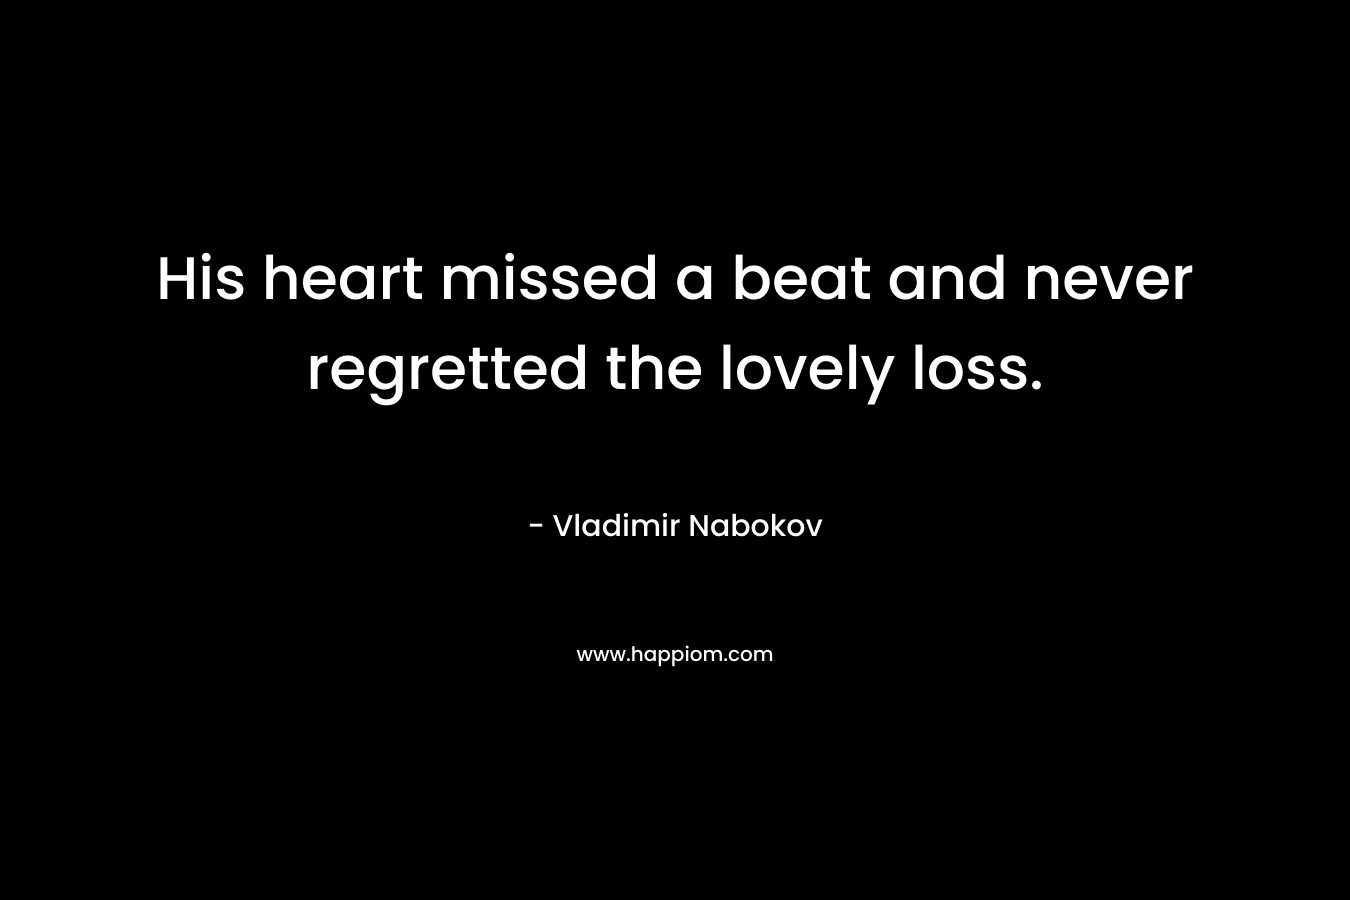 His heart missed a beat and never regretted the lovely loss.